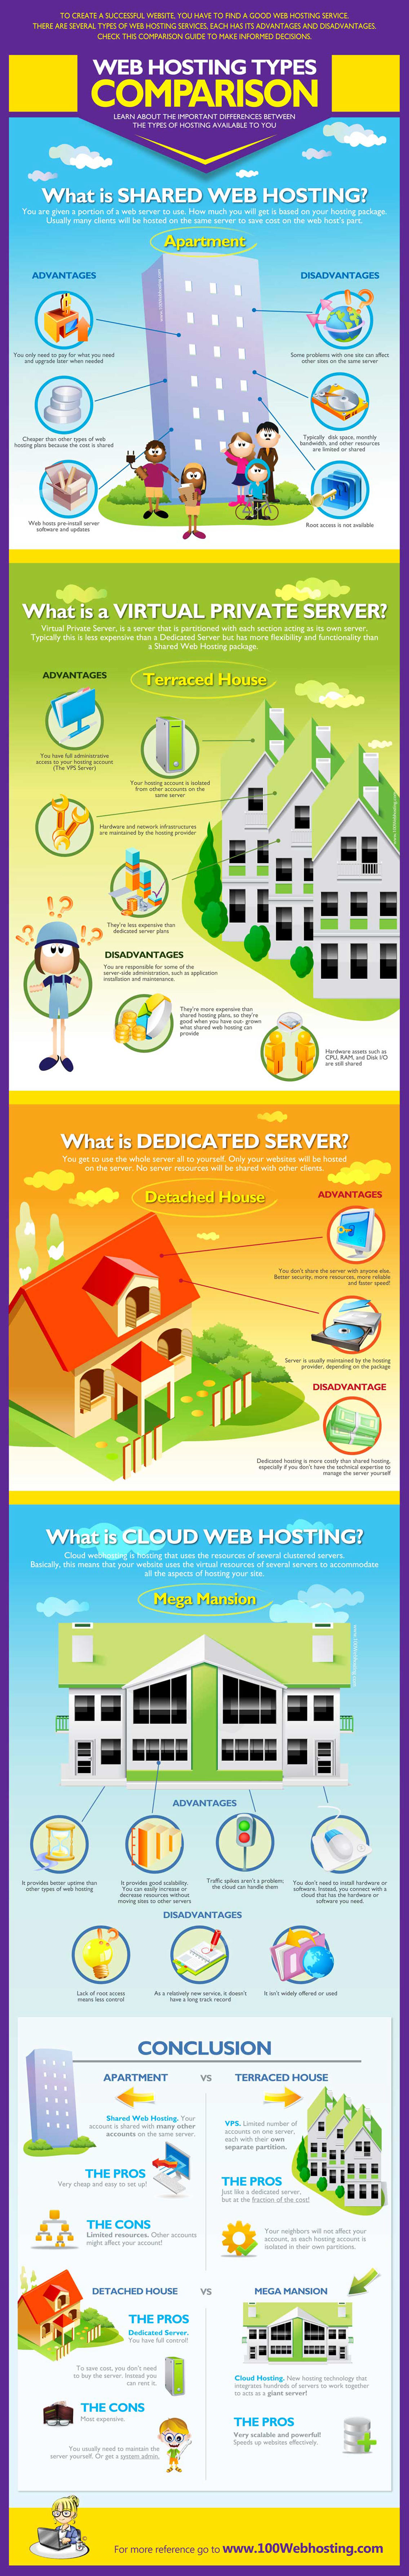 different-types-of-web-hosting-services-infographic